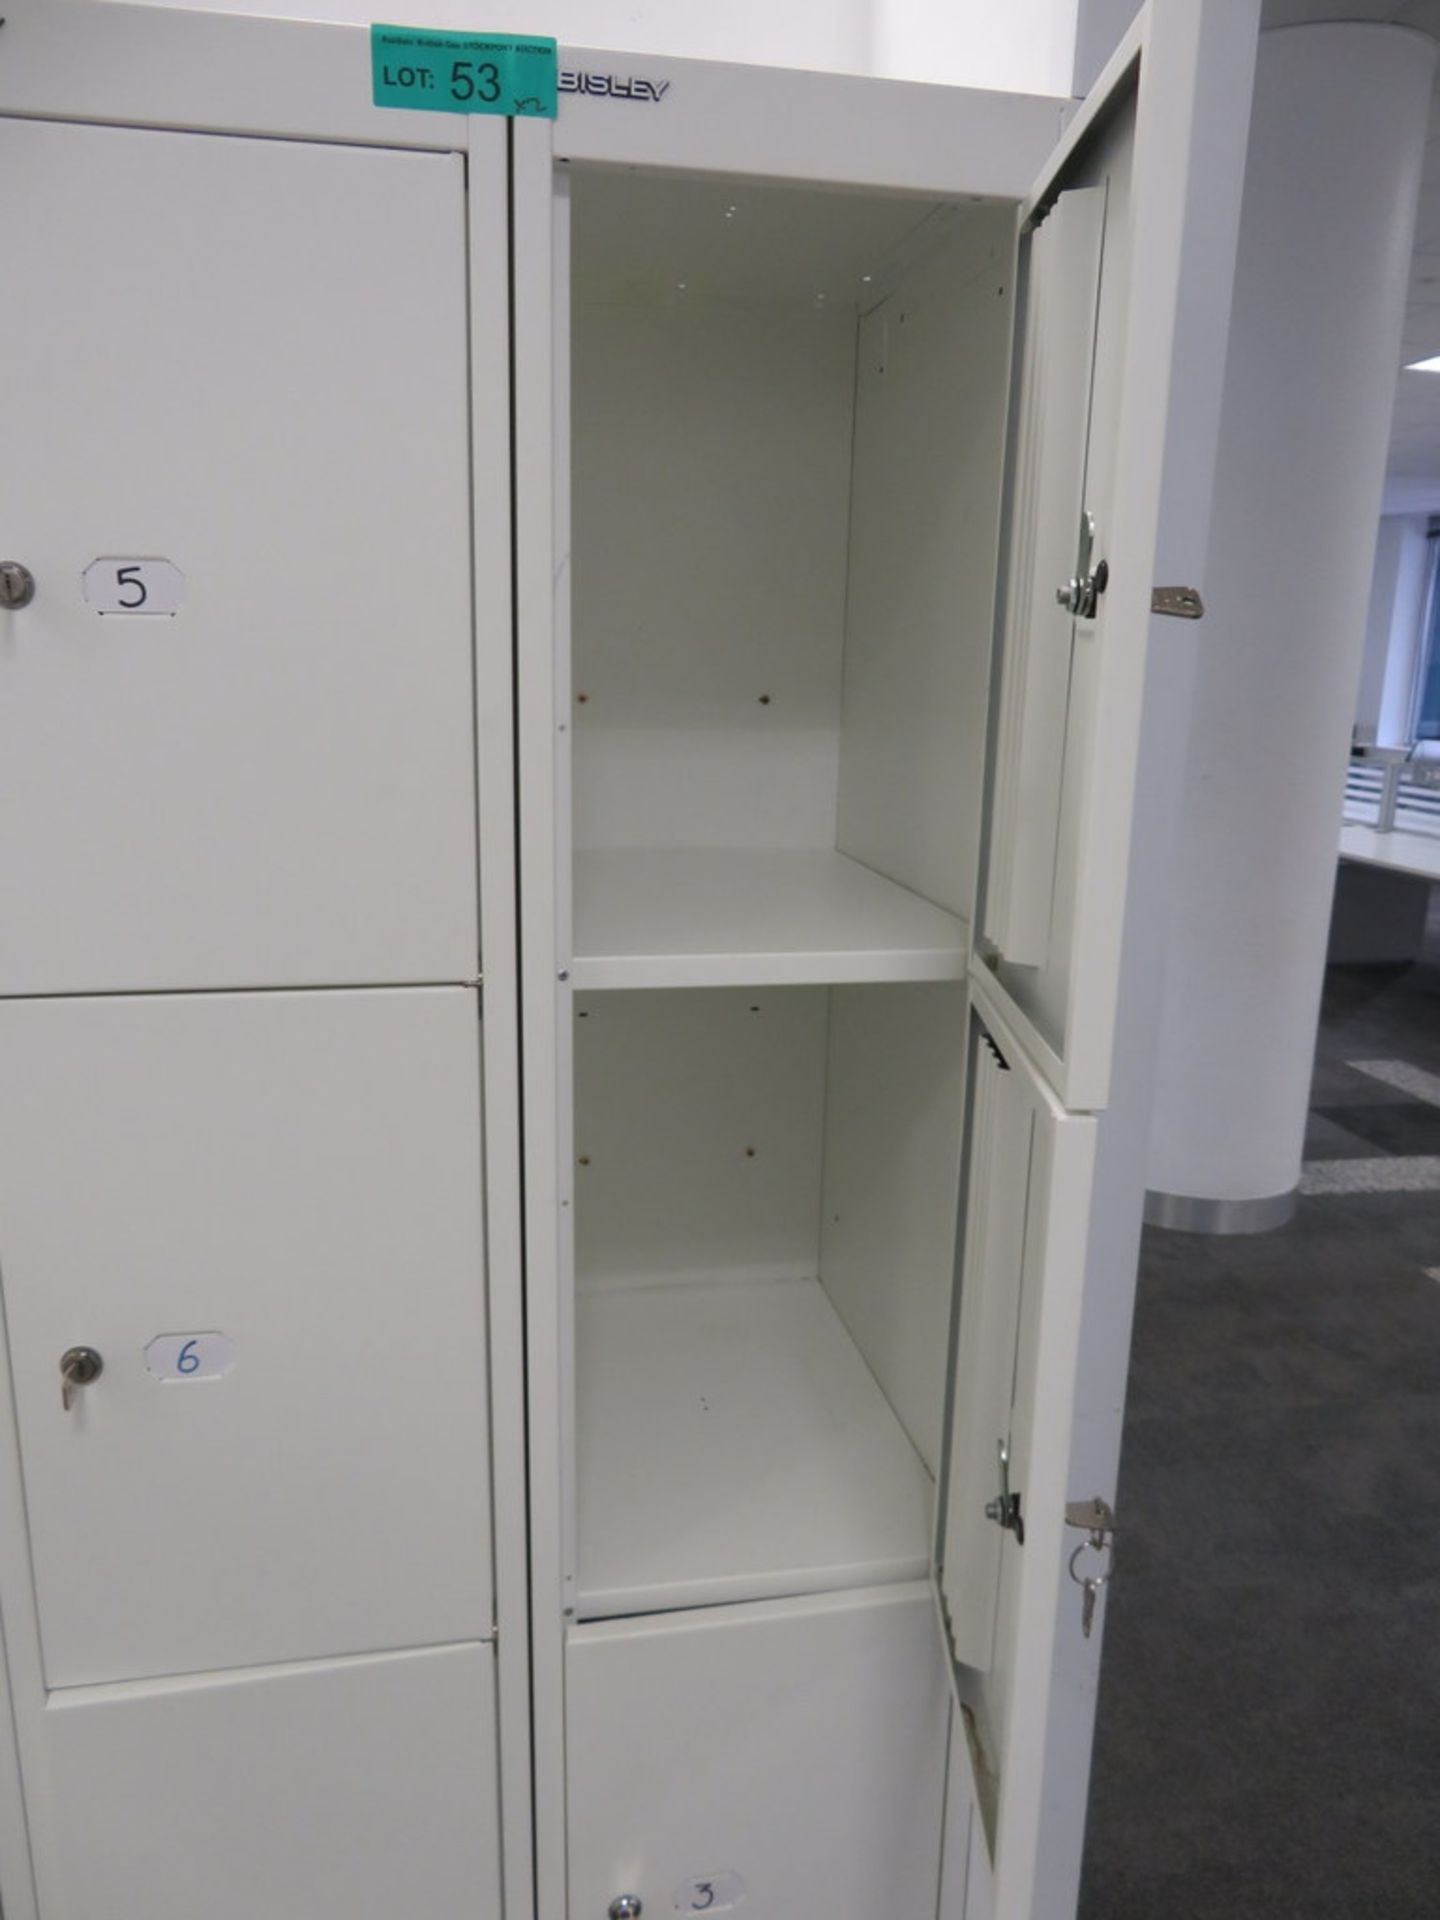 2x Bisley 4 Compartment Personnel Locker. - Image 2 of 2